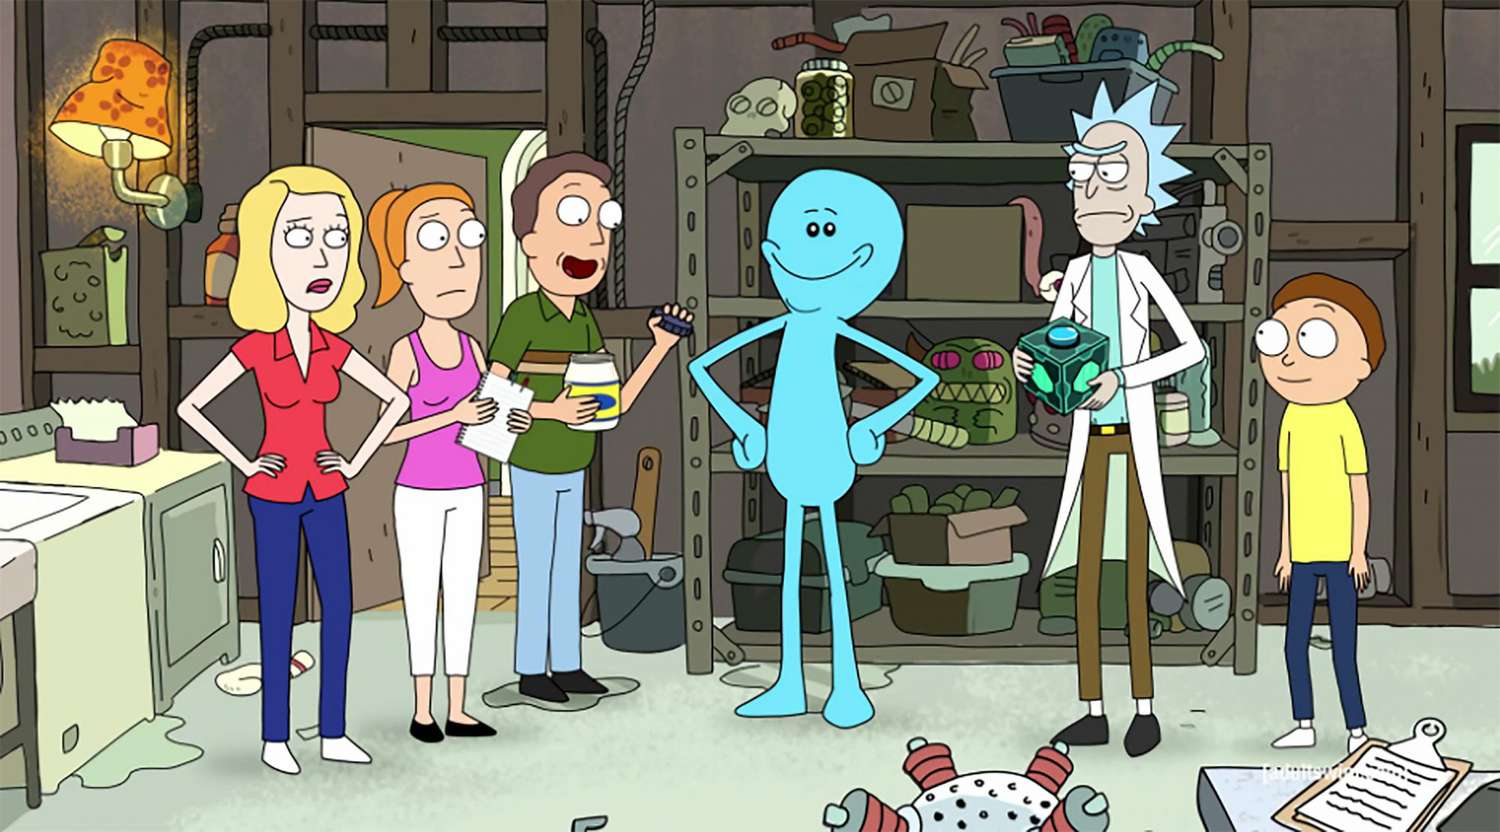 Ricky and Morty - Mr. Meeseeks (Season 1, Episode 5)